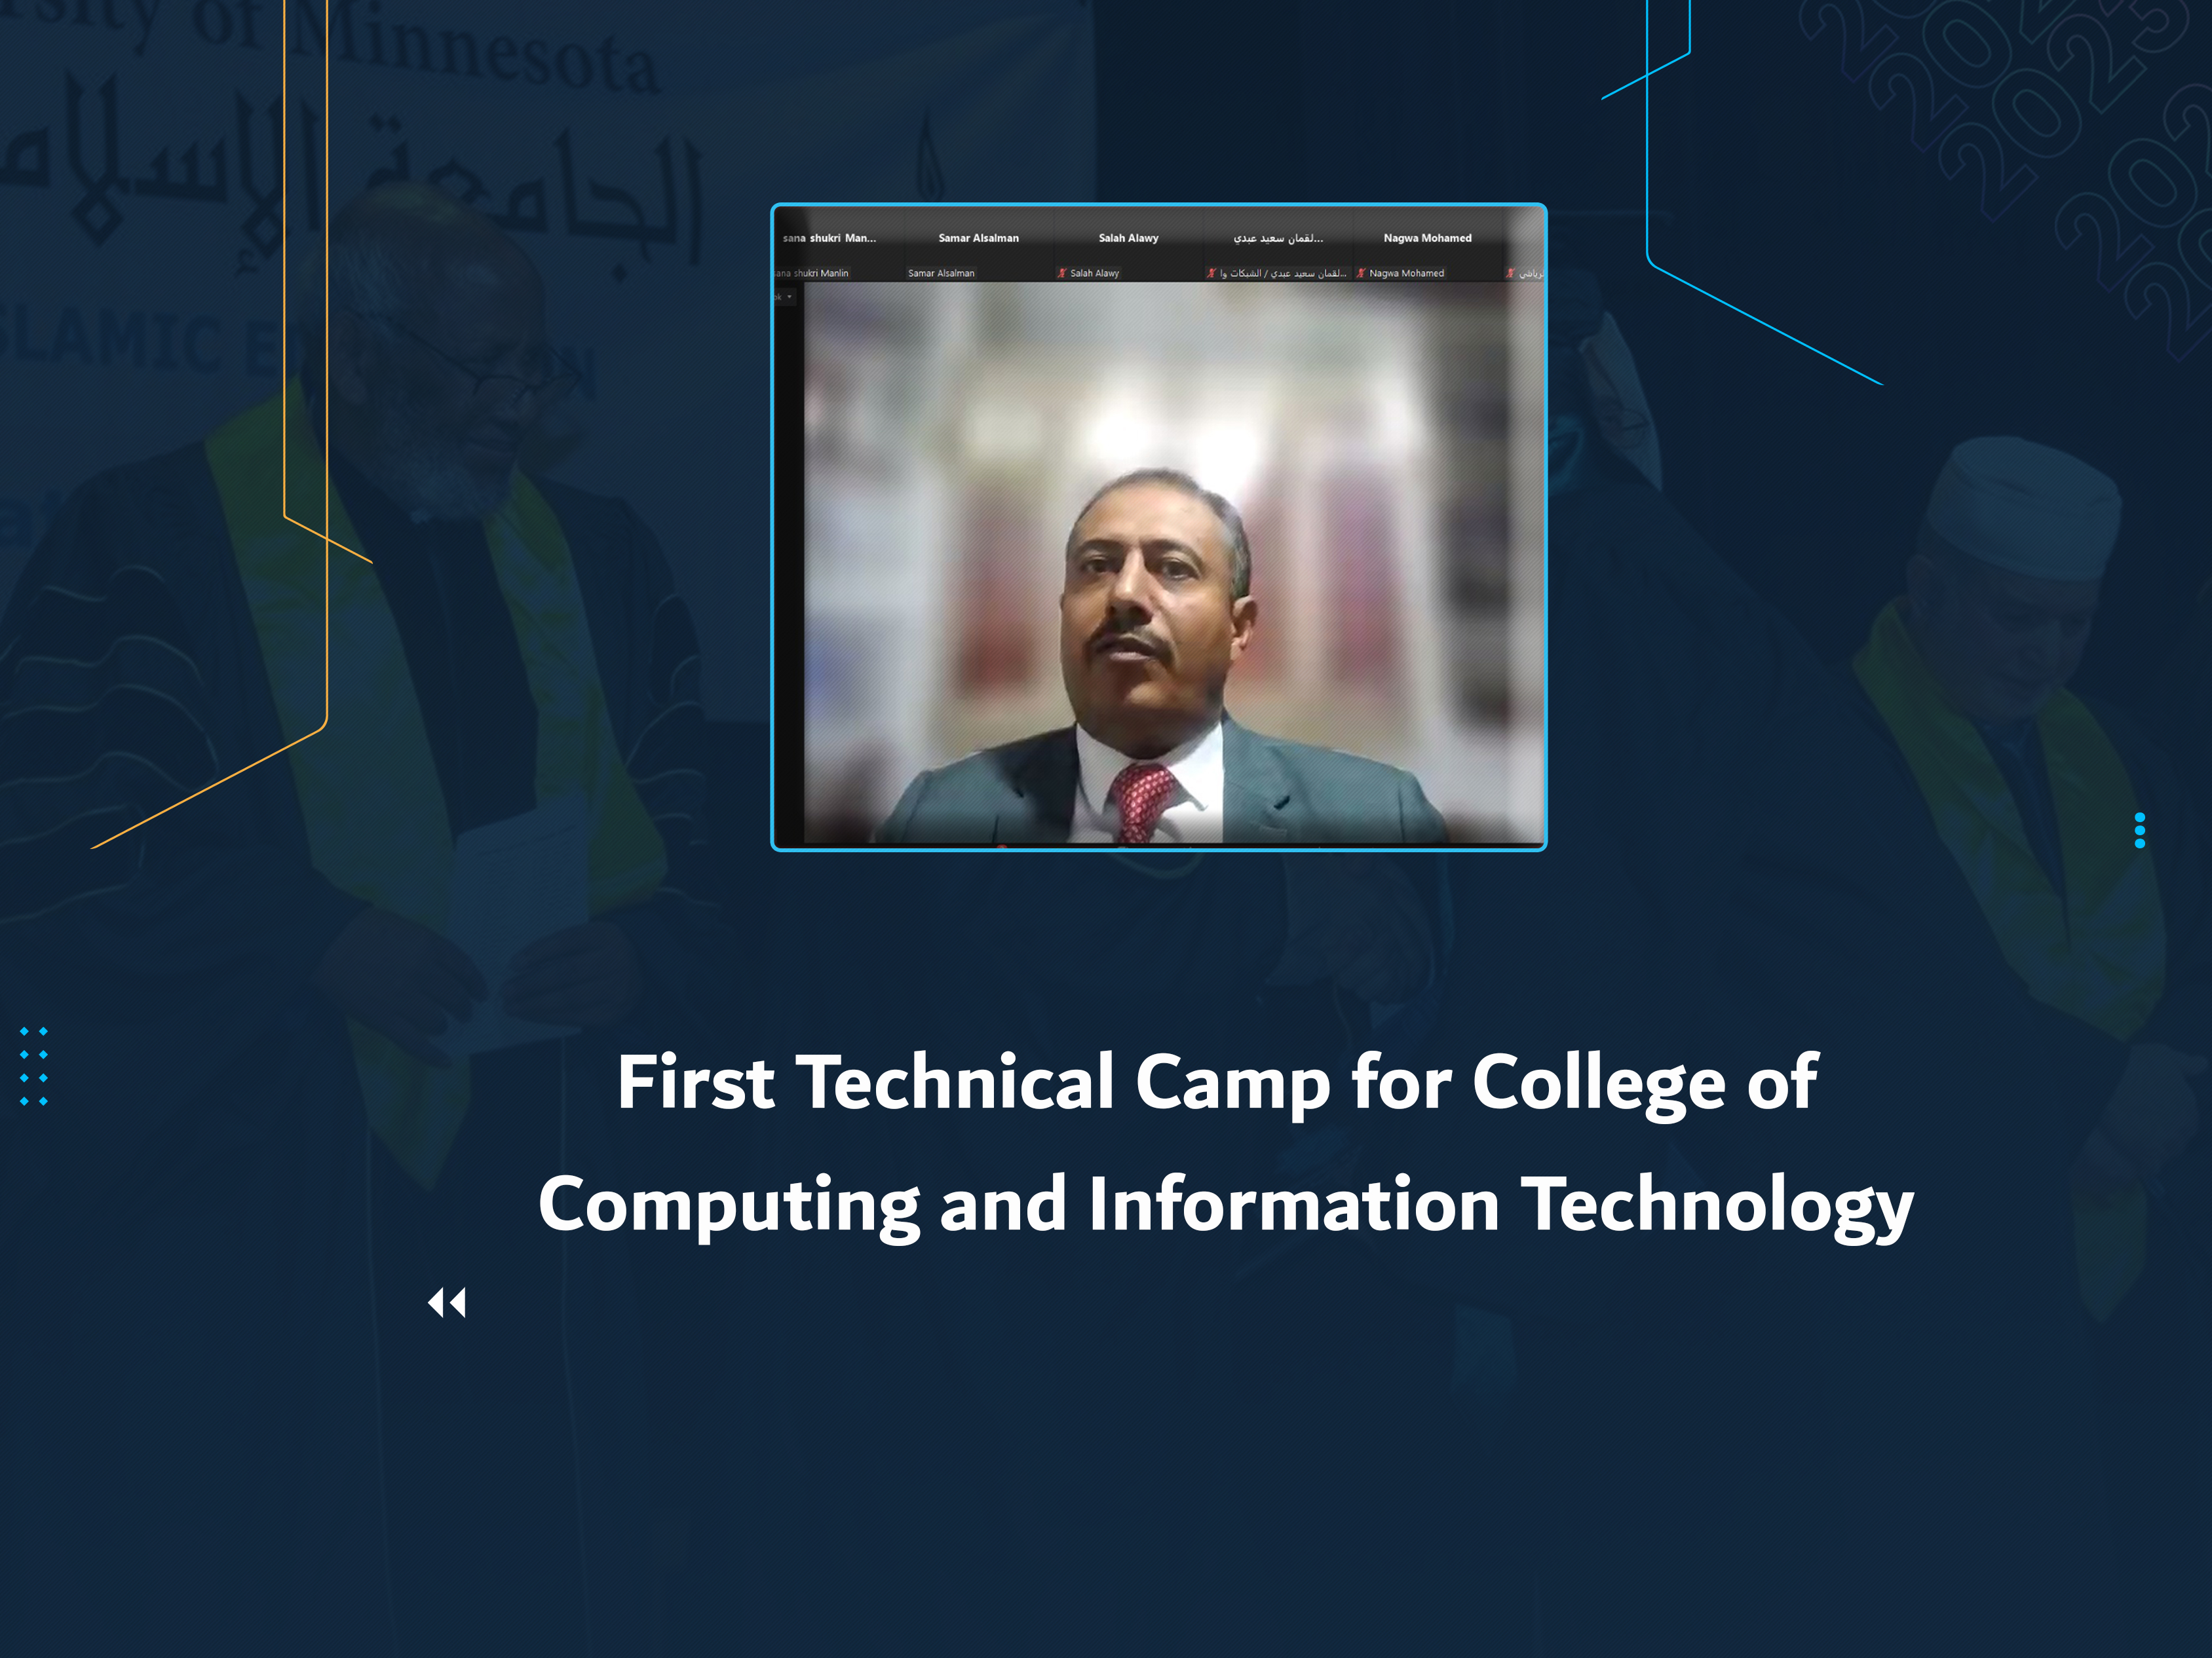 First Technical Camp for College of Computing and Information Technology